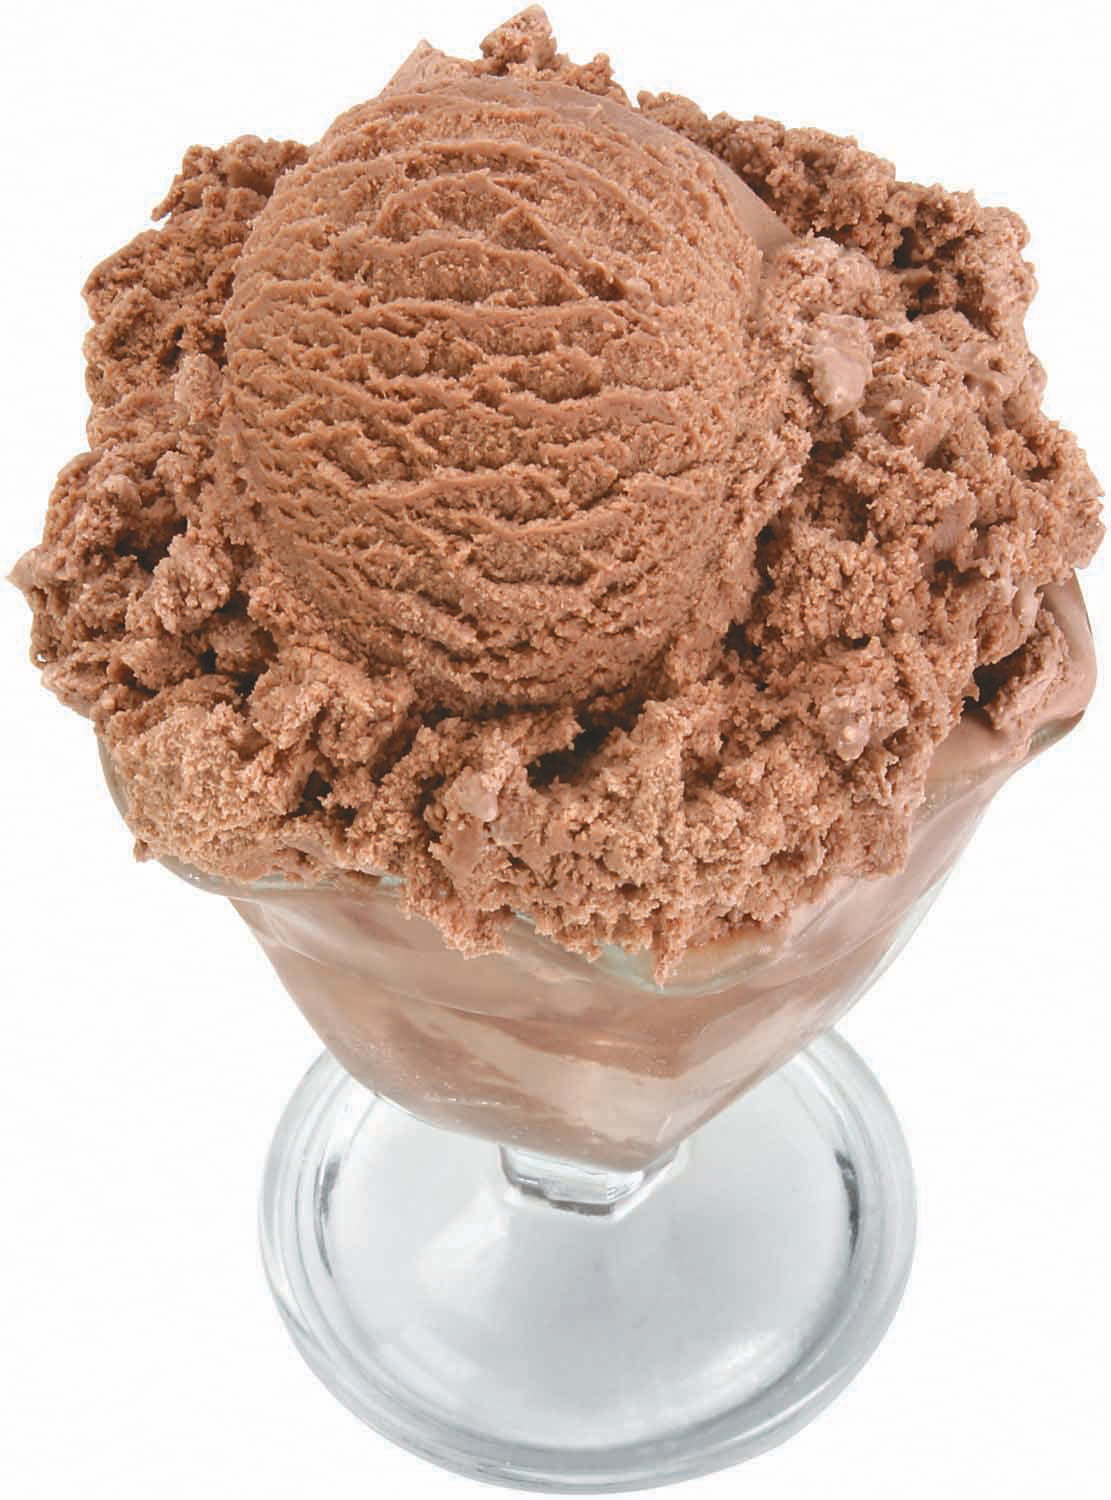 Chocolate Ice Cream in Bowl Food Picture